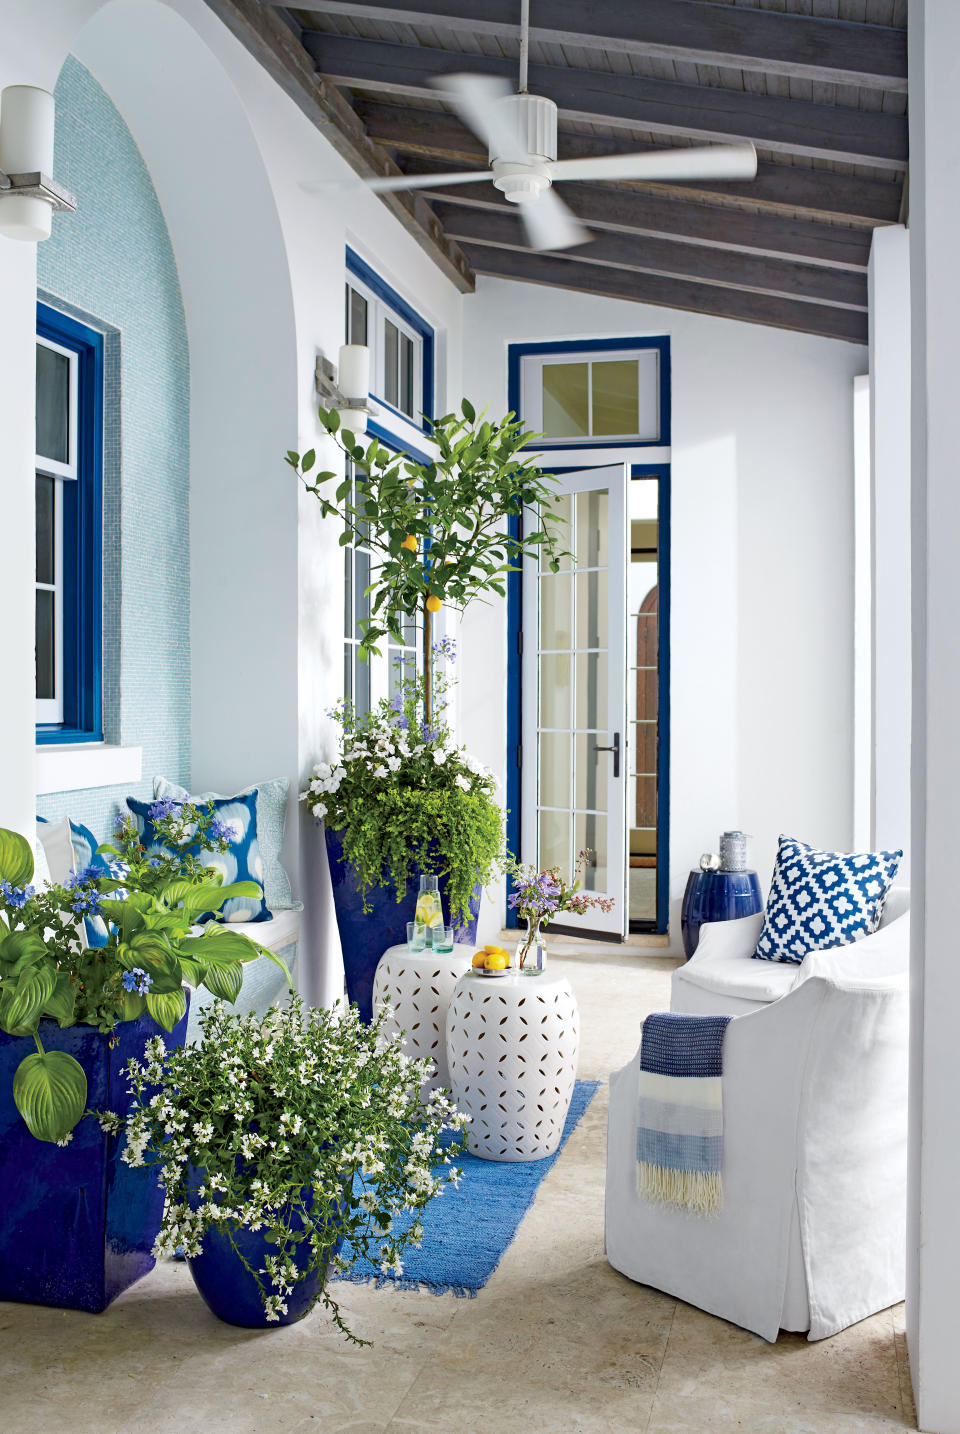 Brighten Up with Blue and White